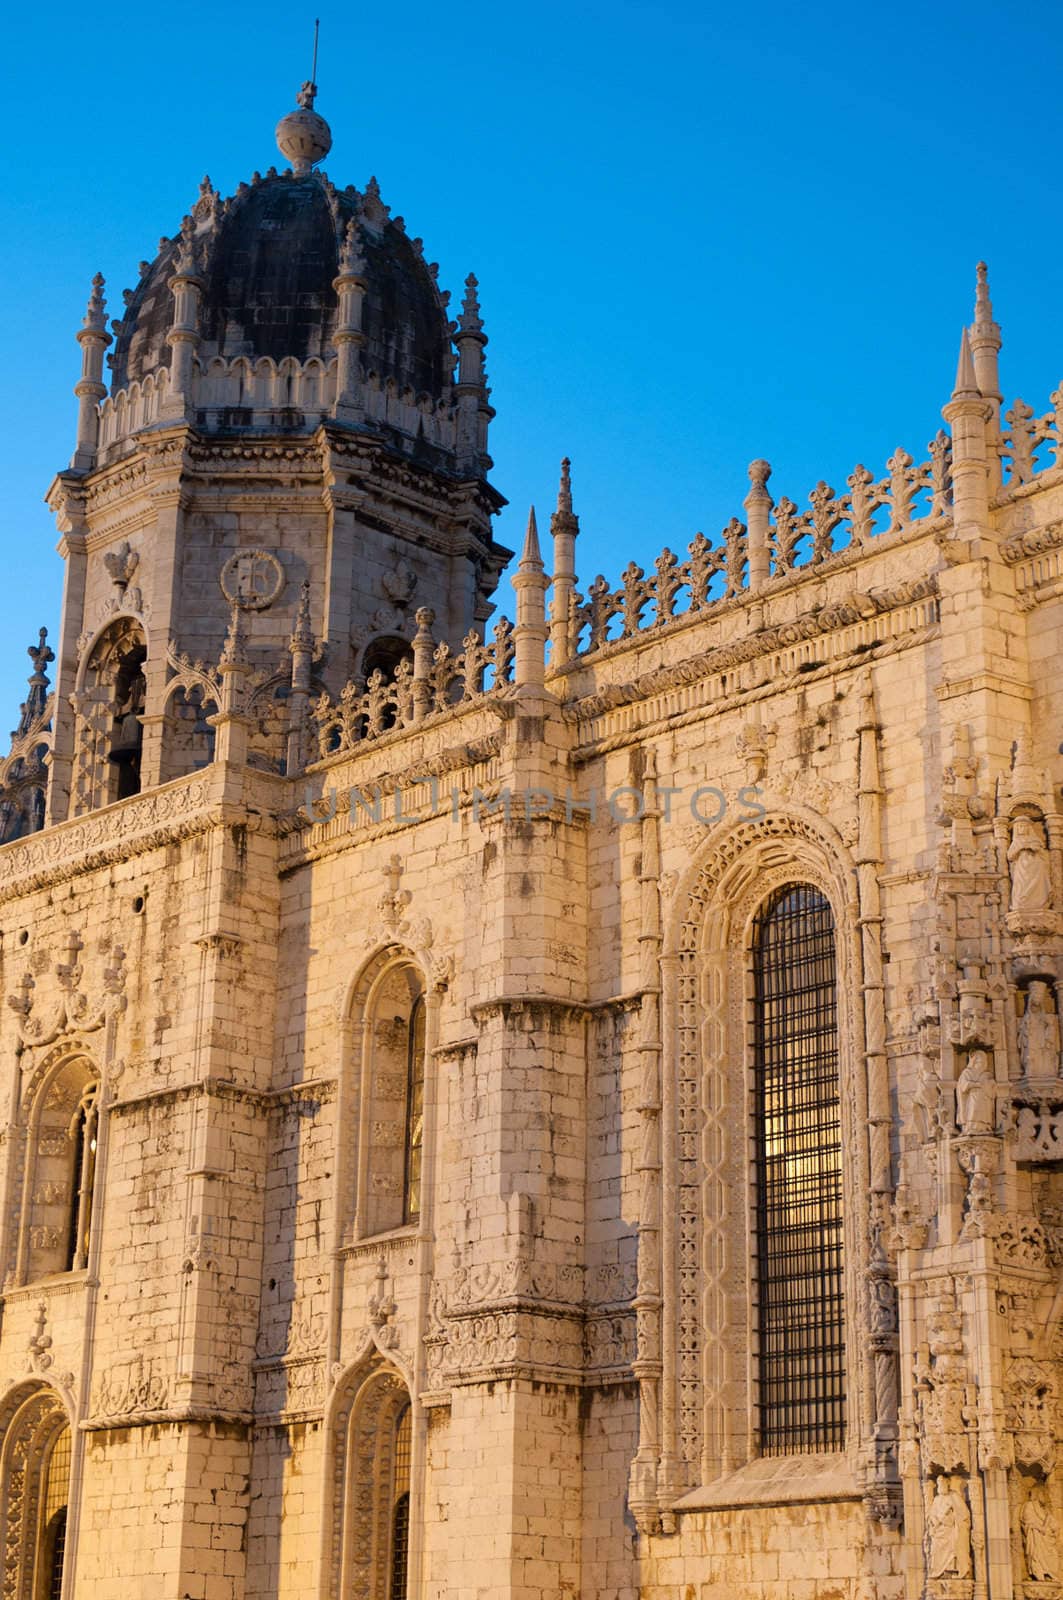 famous Hieronymites Monastery (Mosteiro dos Jeronimos) UNESCO World Heritage Site in Lisbon, Portugal (sunset picture)